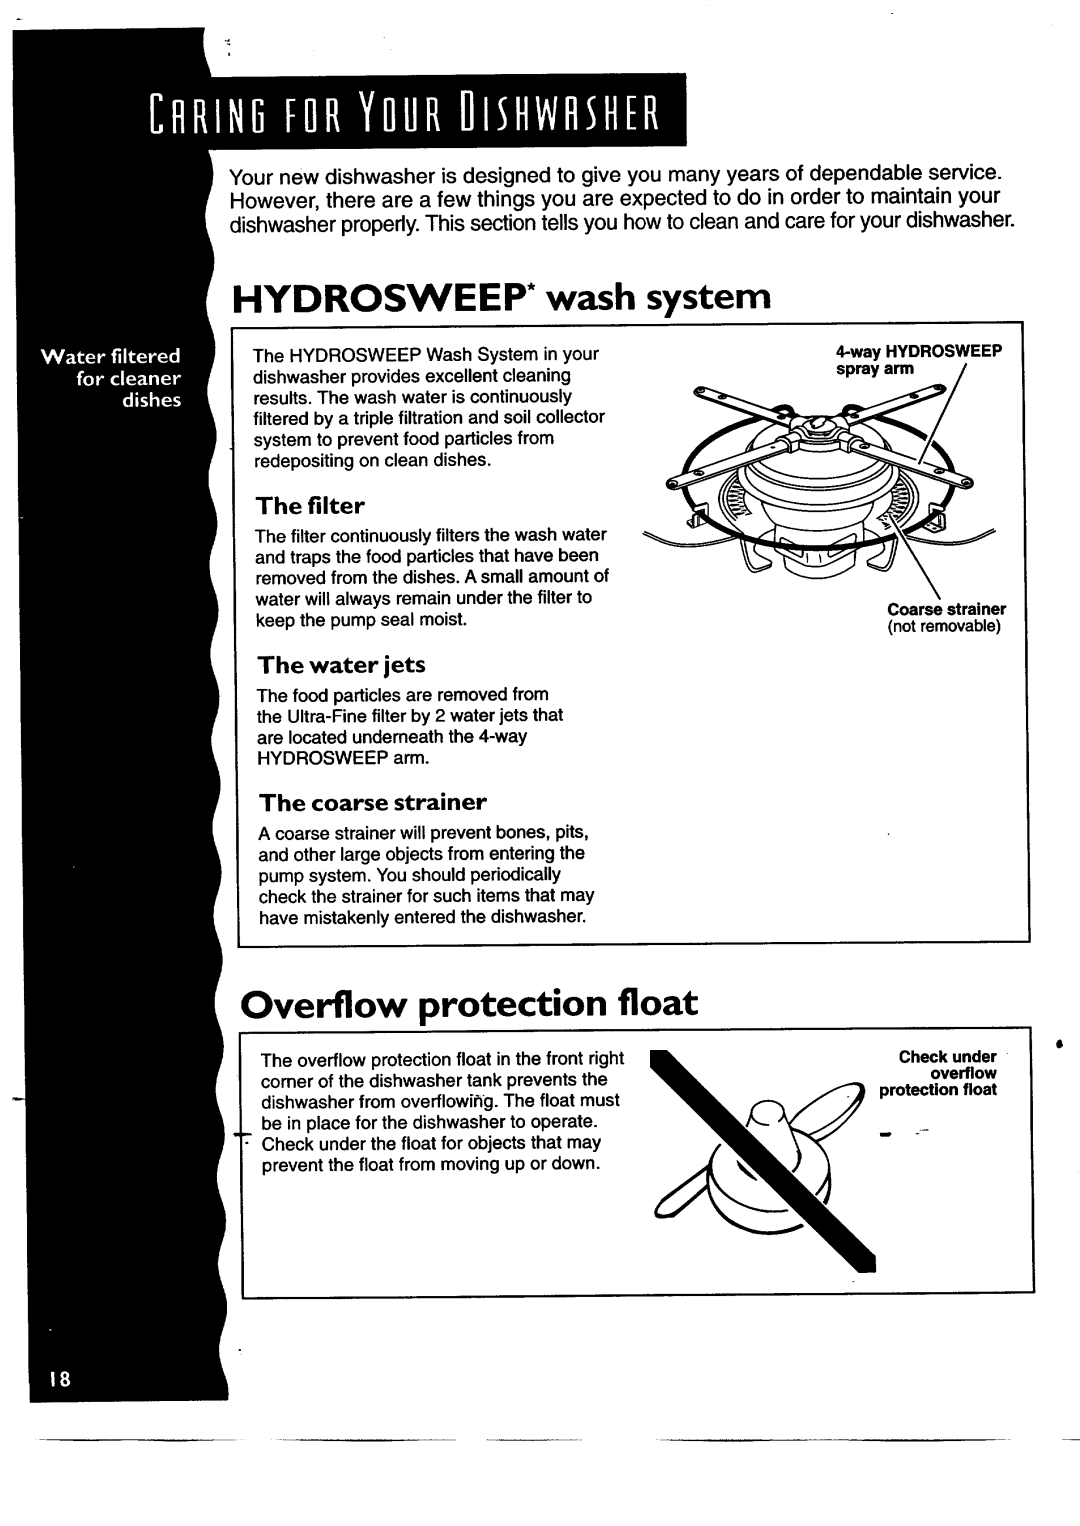 KitchenAid KUDH24SE HYDROSWEEP* wash system, Overflow protection float, The filter, The water jets, The coarse strainer 